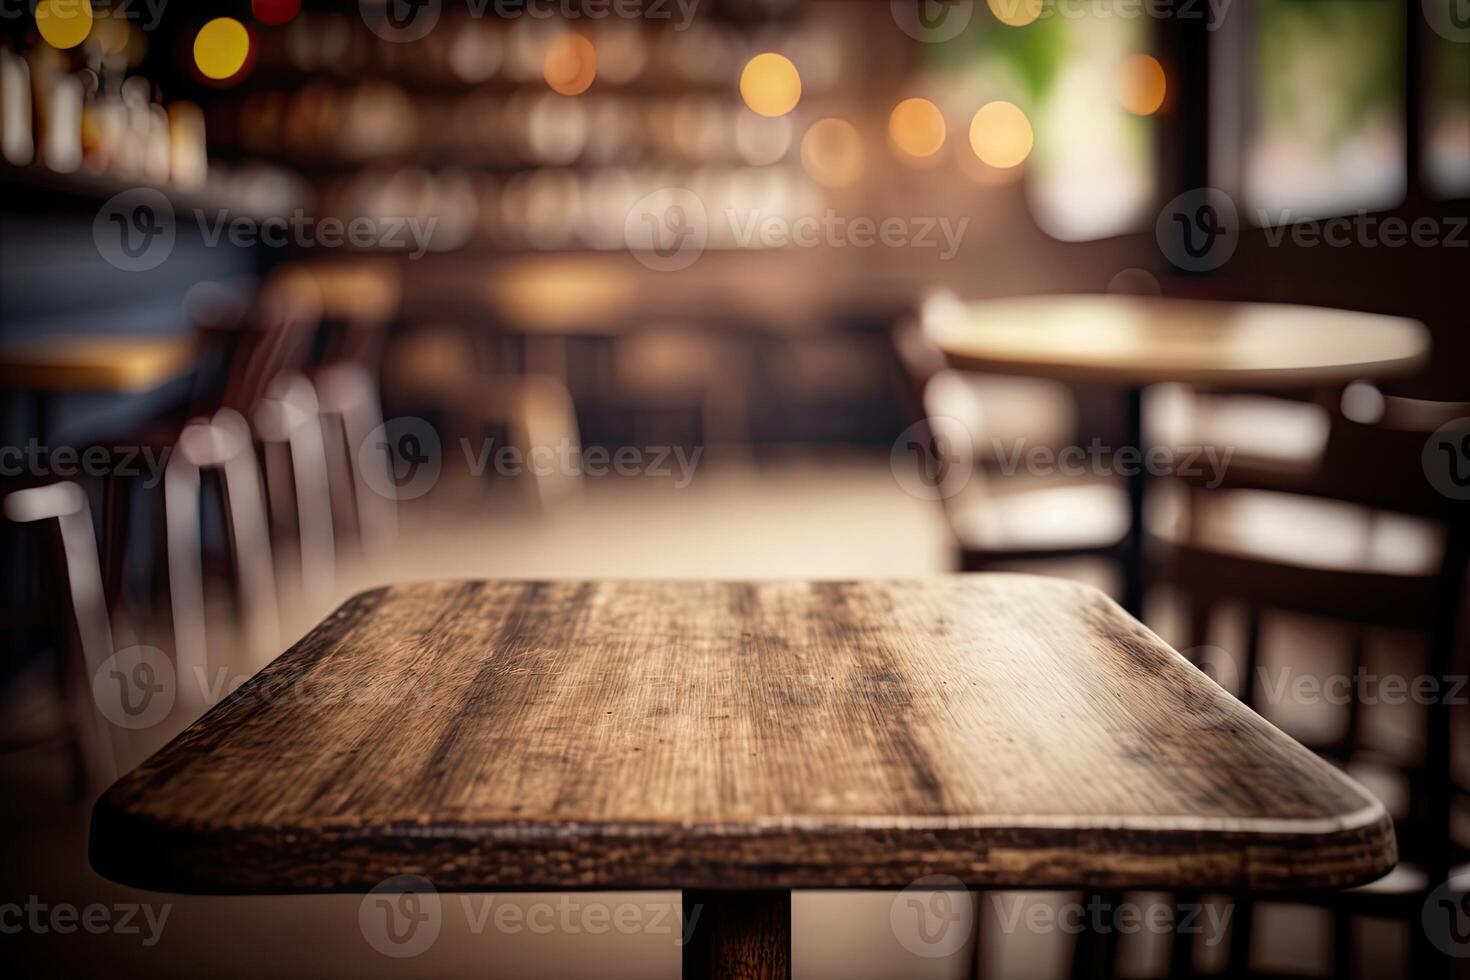 illustration of blurred background of a cafe or restaurant features an empty wooden table photo